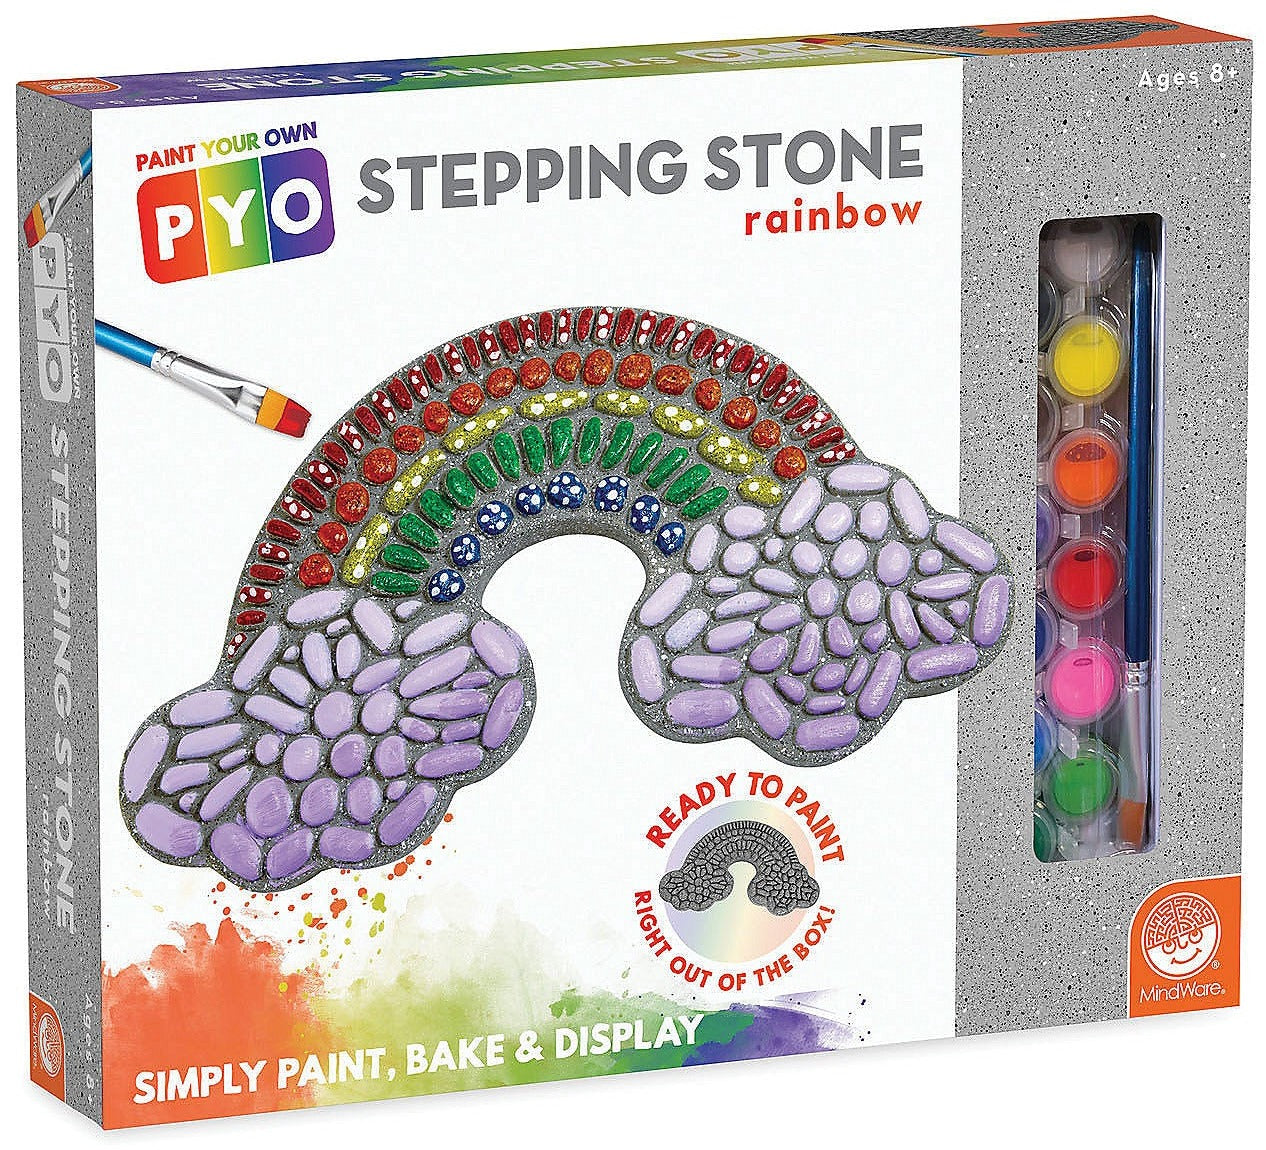 Paint Your Own Stepping Stone: Rainbow